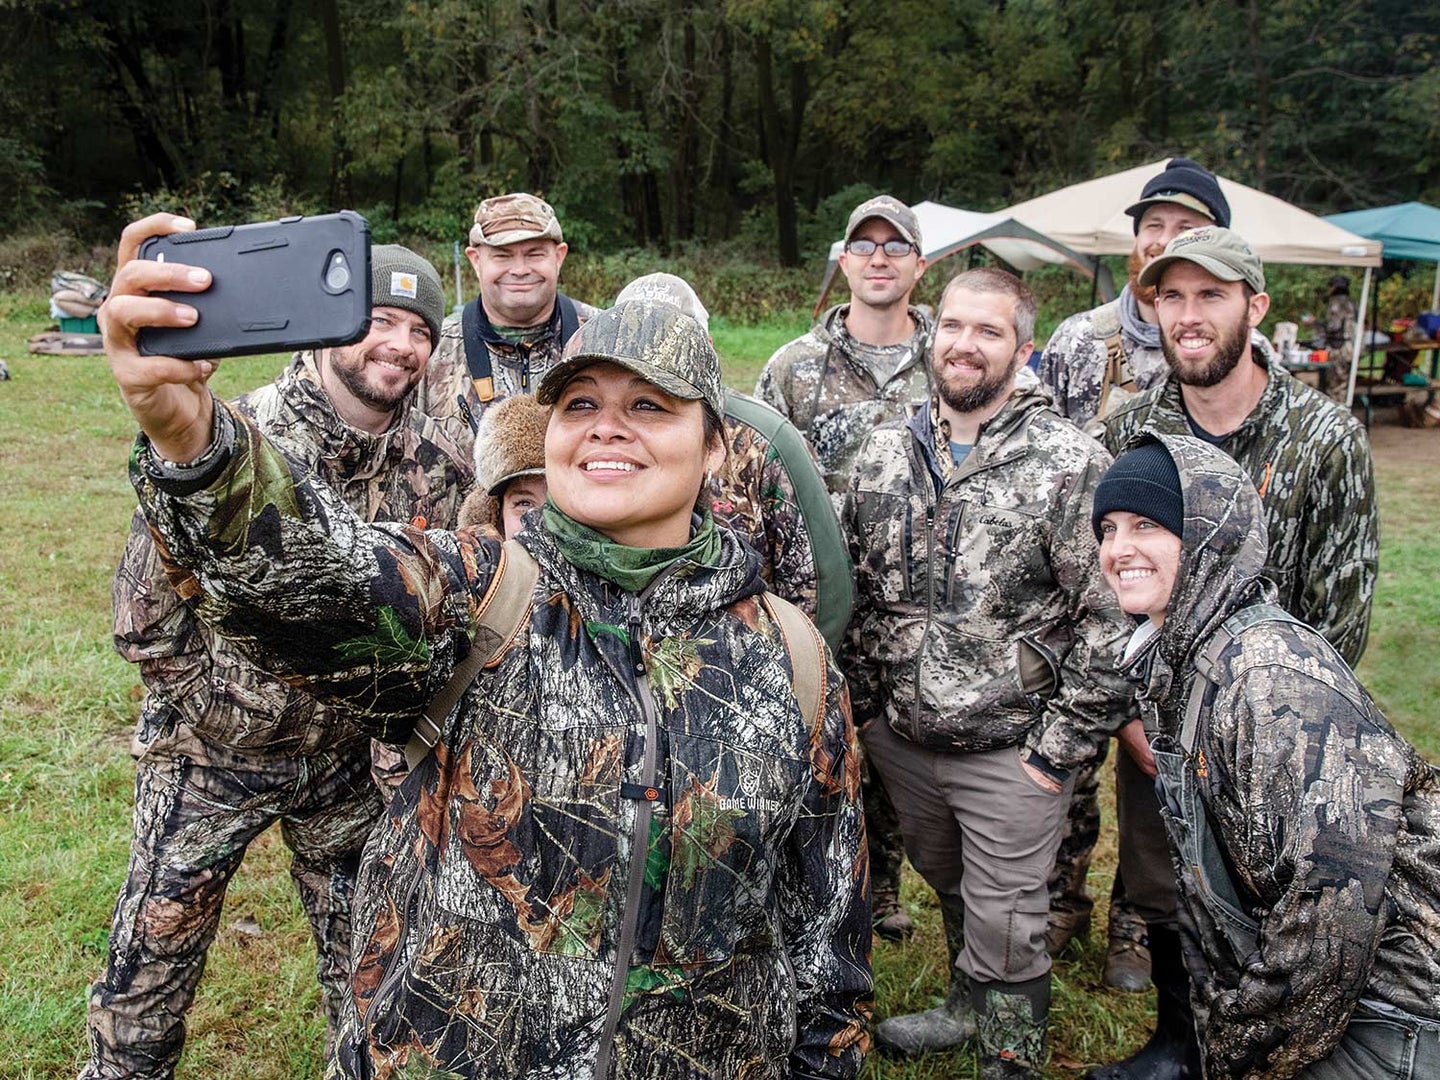 A group of men and women hunters in full camo pose for a selfie in an open field.